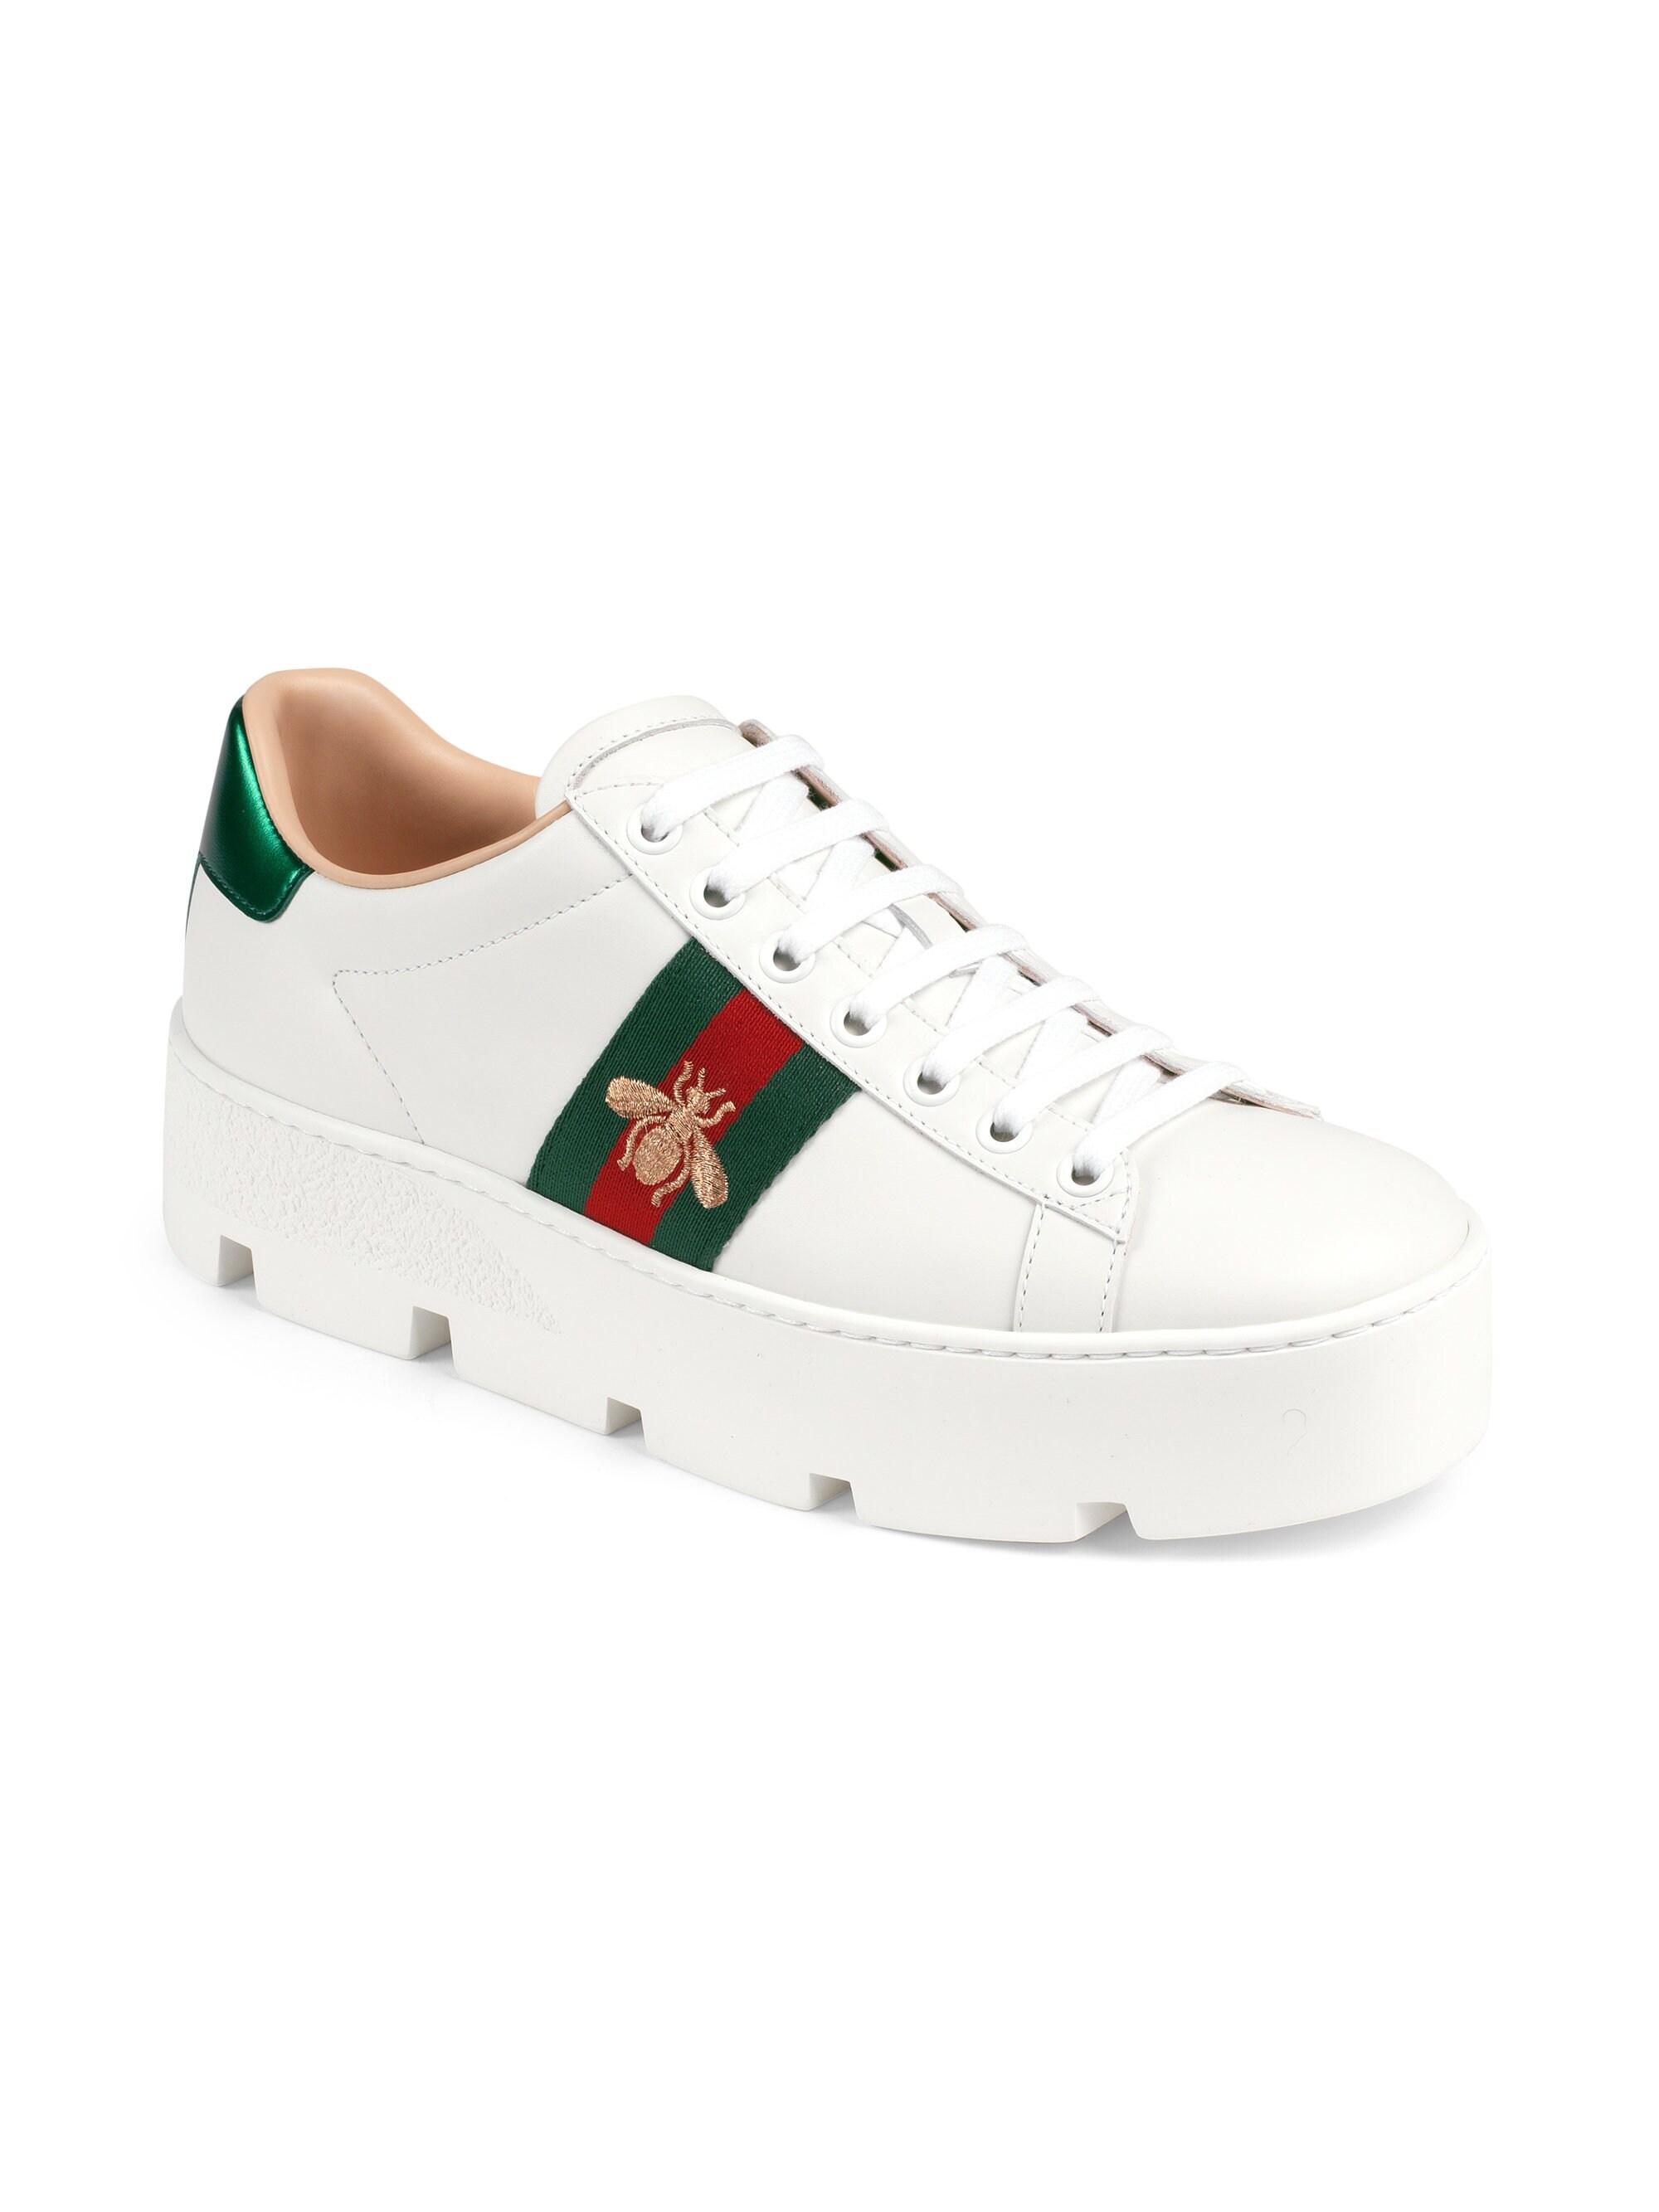 Gucci New Ace Platform Bee Sneakers in White - Lyst